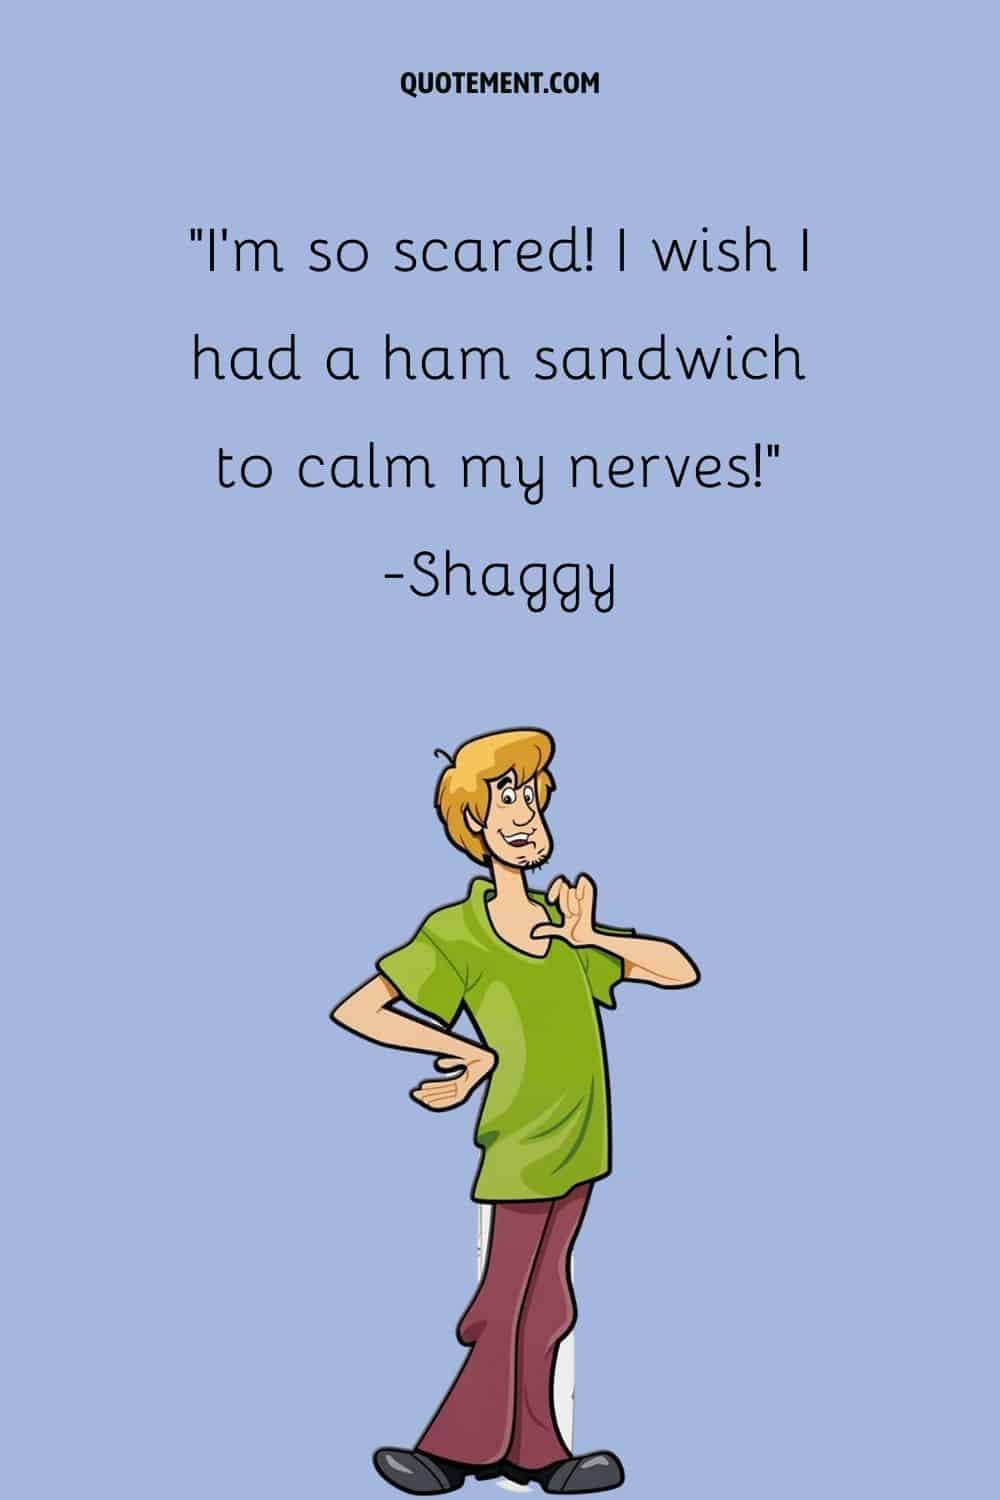 Shaggy image representing funny Shaggy Scooby-Doo quote
